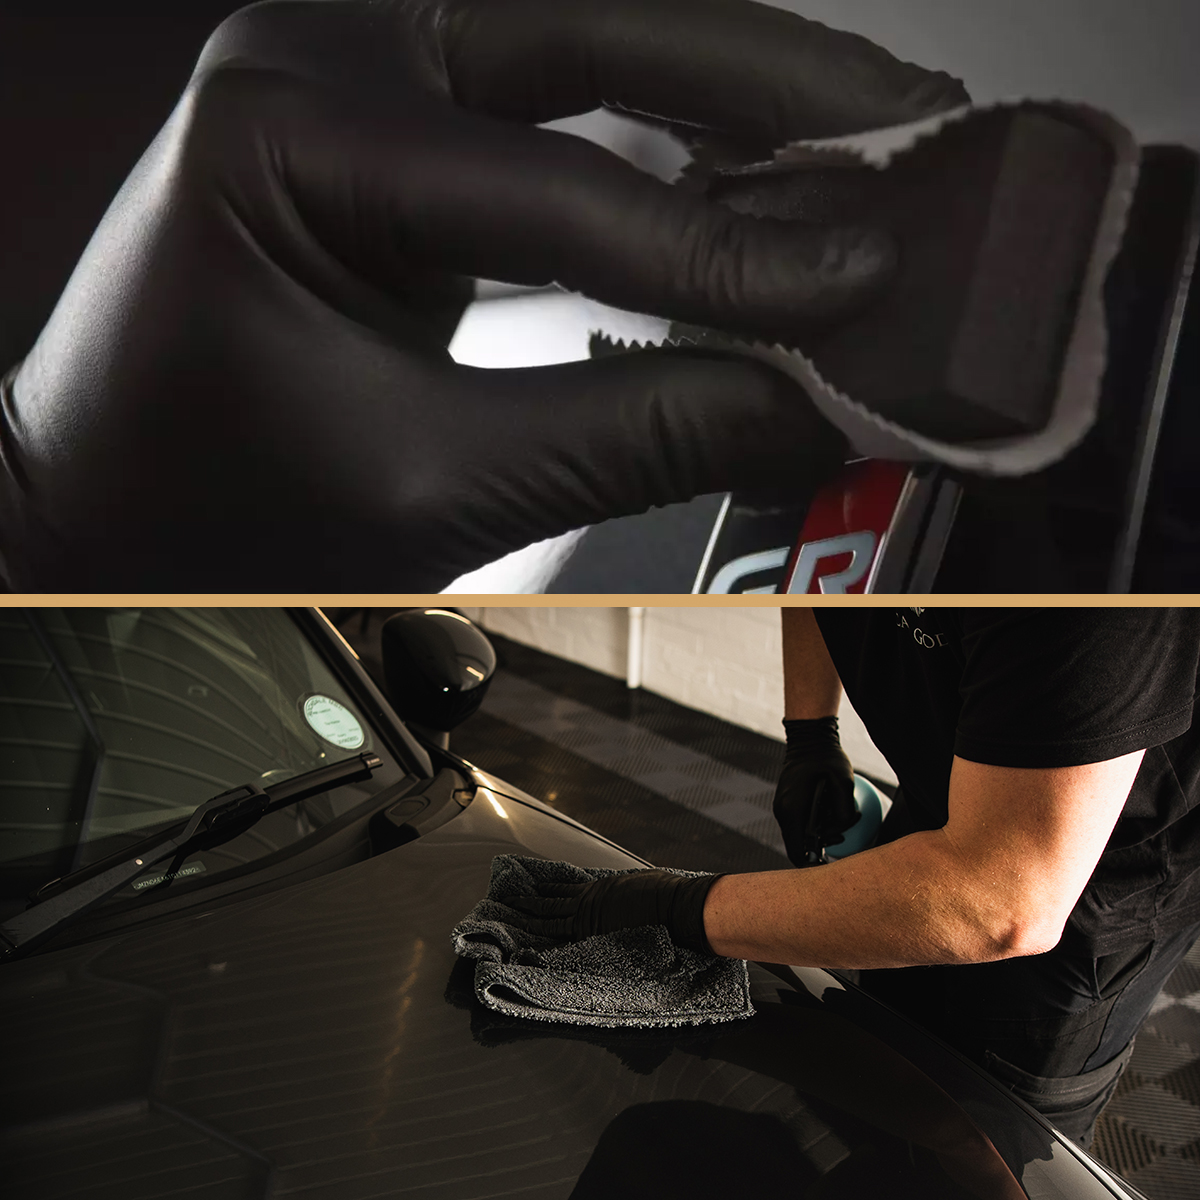 Top picture and bottom picture separated by gold line. Top image shows microfibre cloth wrapped around application block, applying Ceramico Pro to a black vehicle. Bottom image shows buffing a black vehicle with a microfibre cloth.